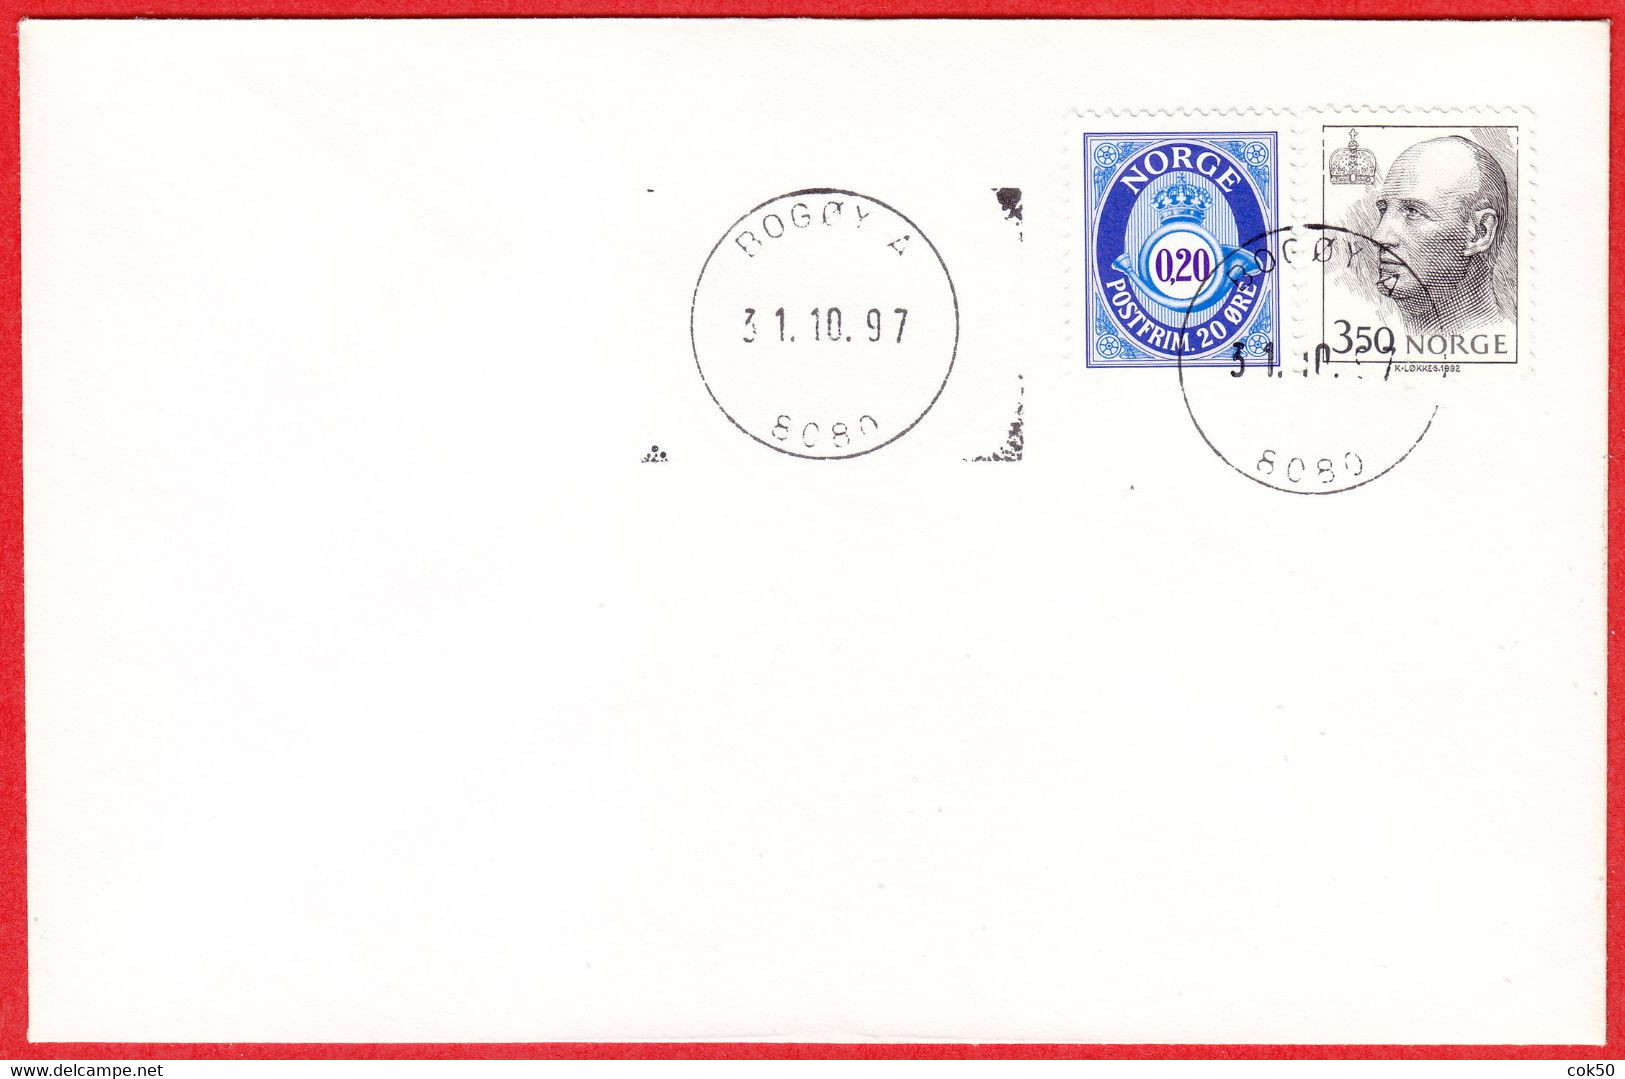 NORWAY -  8080 BOGØY A - 23 MmØ - (Nordland County) - Last Day/postoffice Closed On 1997.10.31 - Emisiones Locales